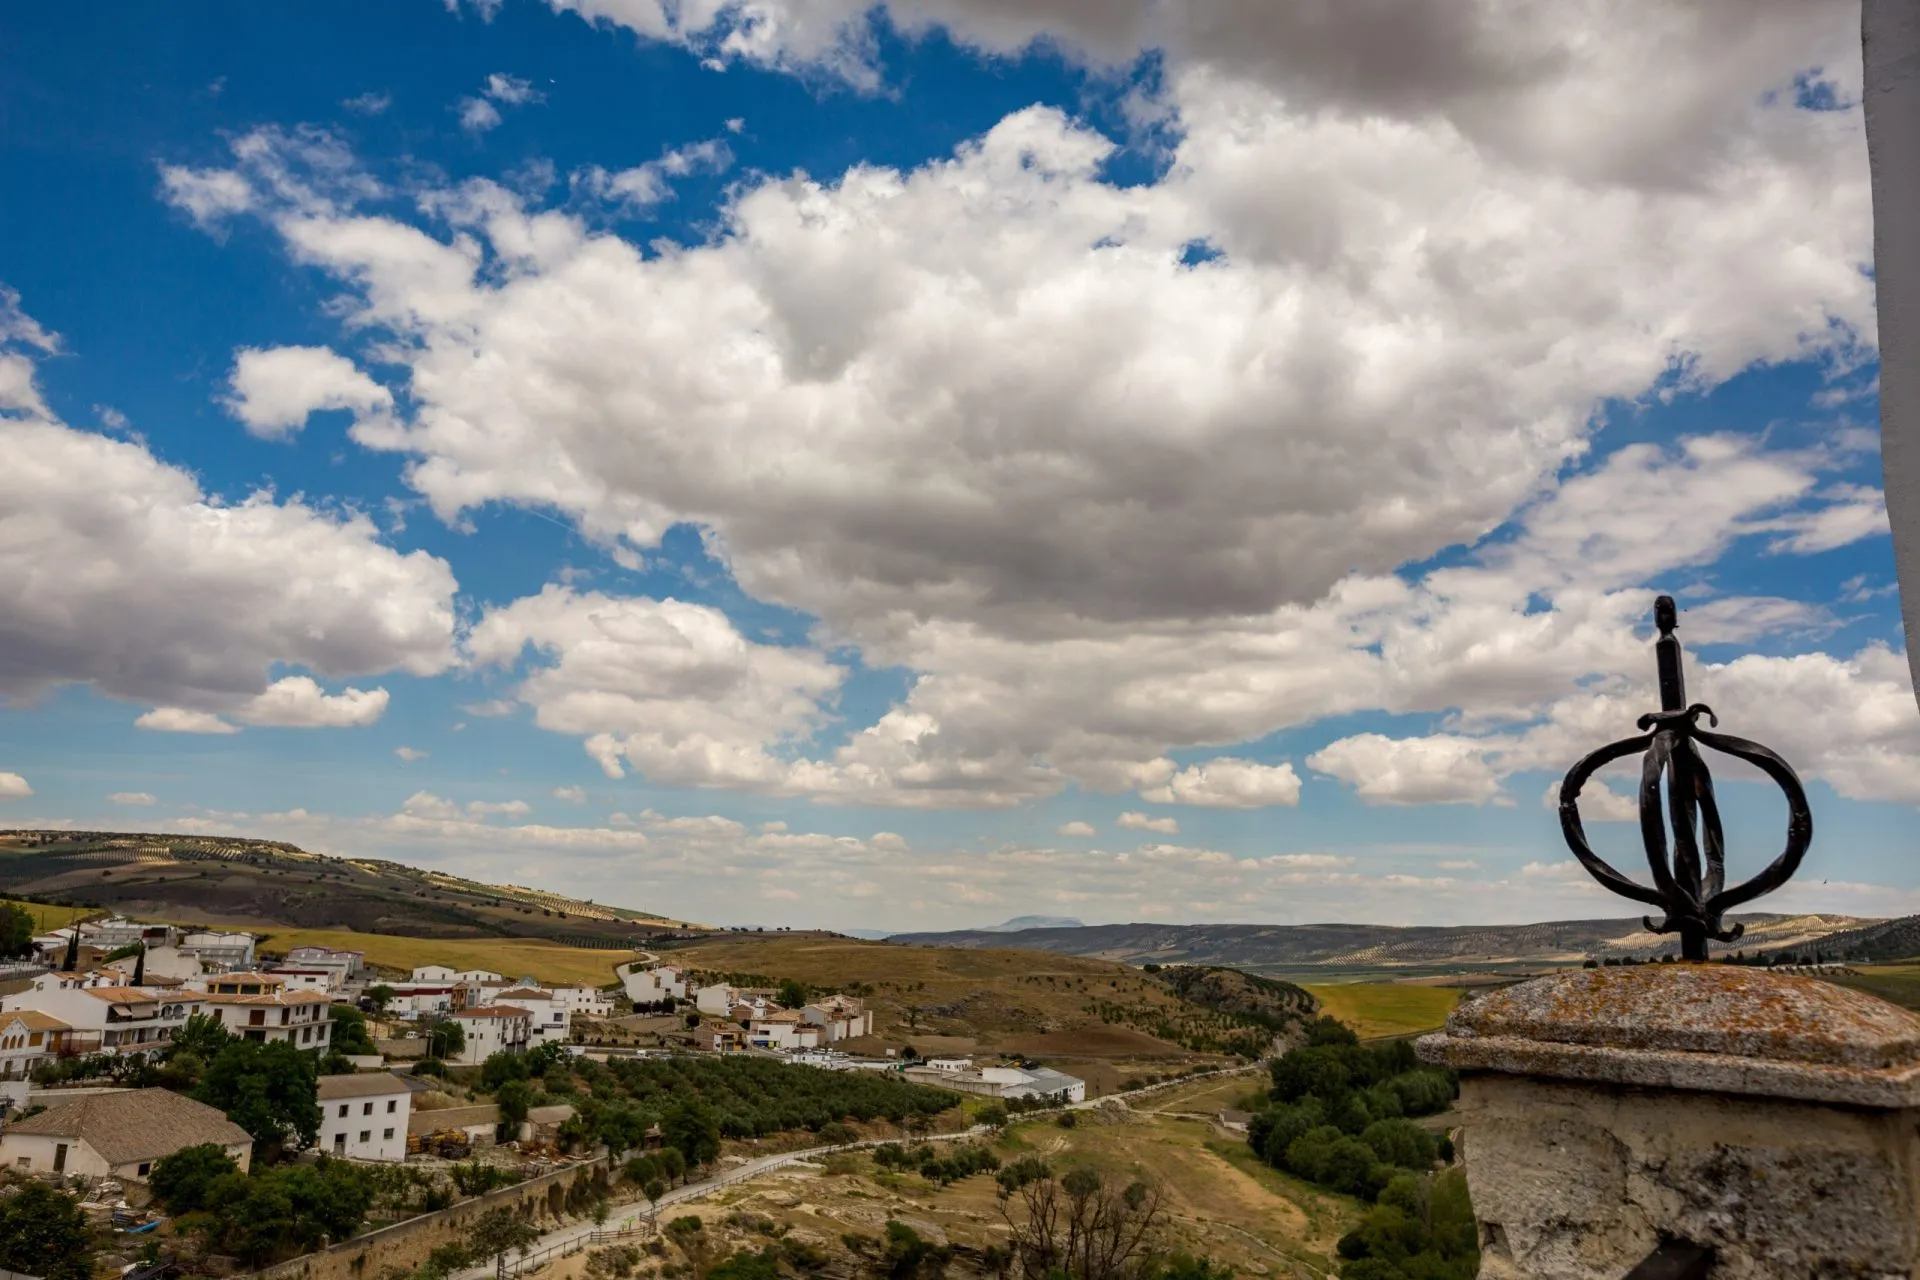 Elevated perspective over the valley. Alhama de Granada, Andalusia, Spain.
Beautiful and interesting travel destination in the warm Southern region. Public street view.